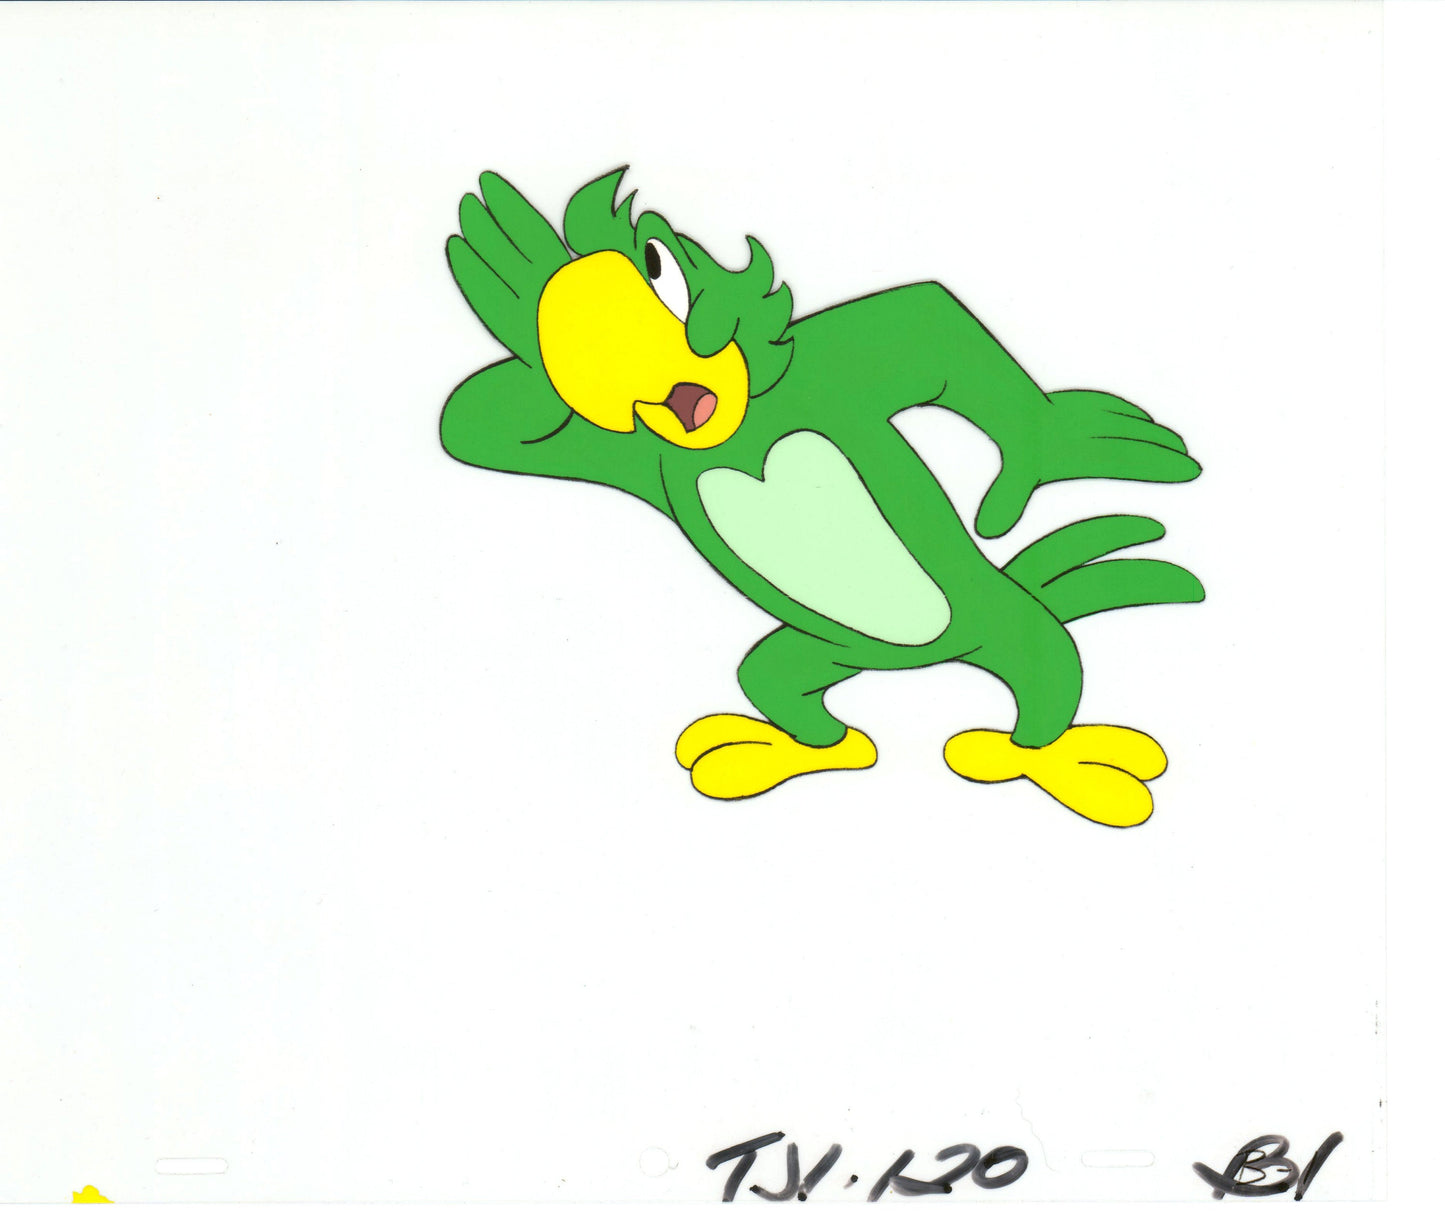 Tom and Jerry Original Production Animation Cel from Filmation 1980-82 b4248